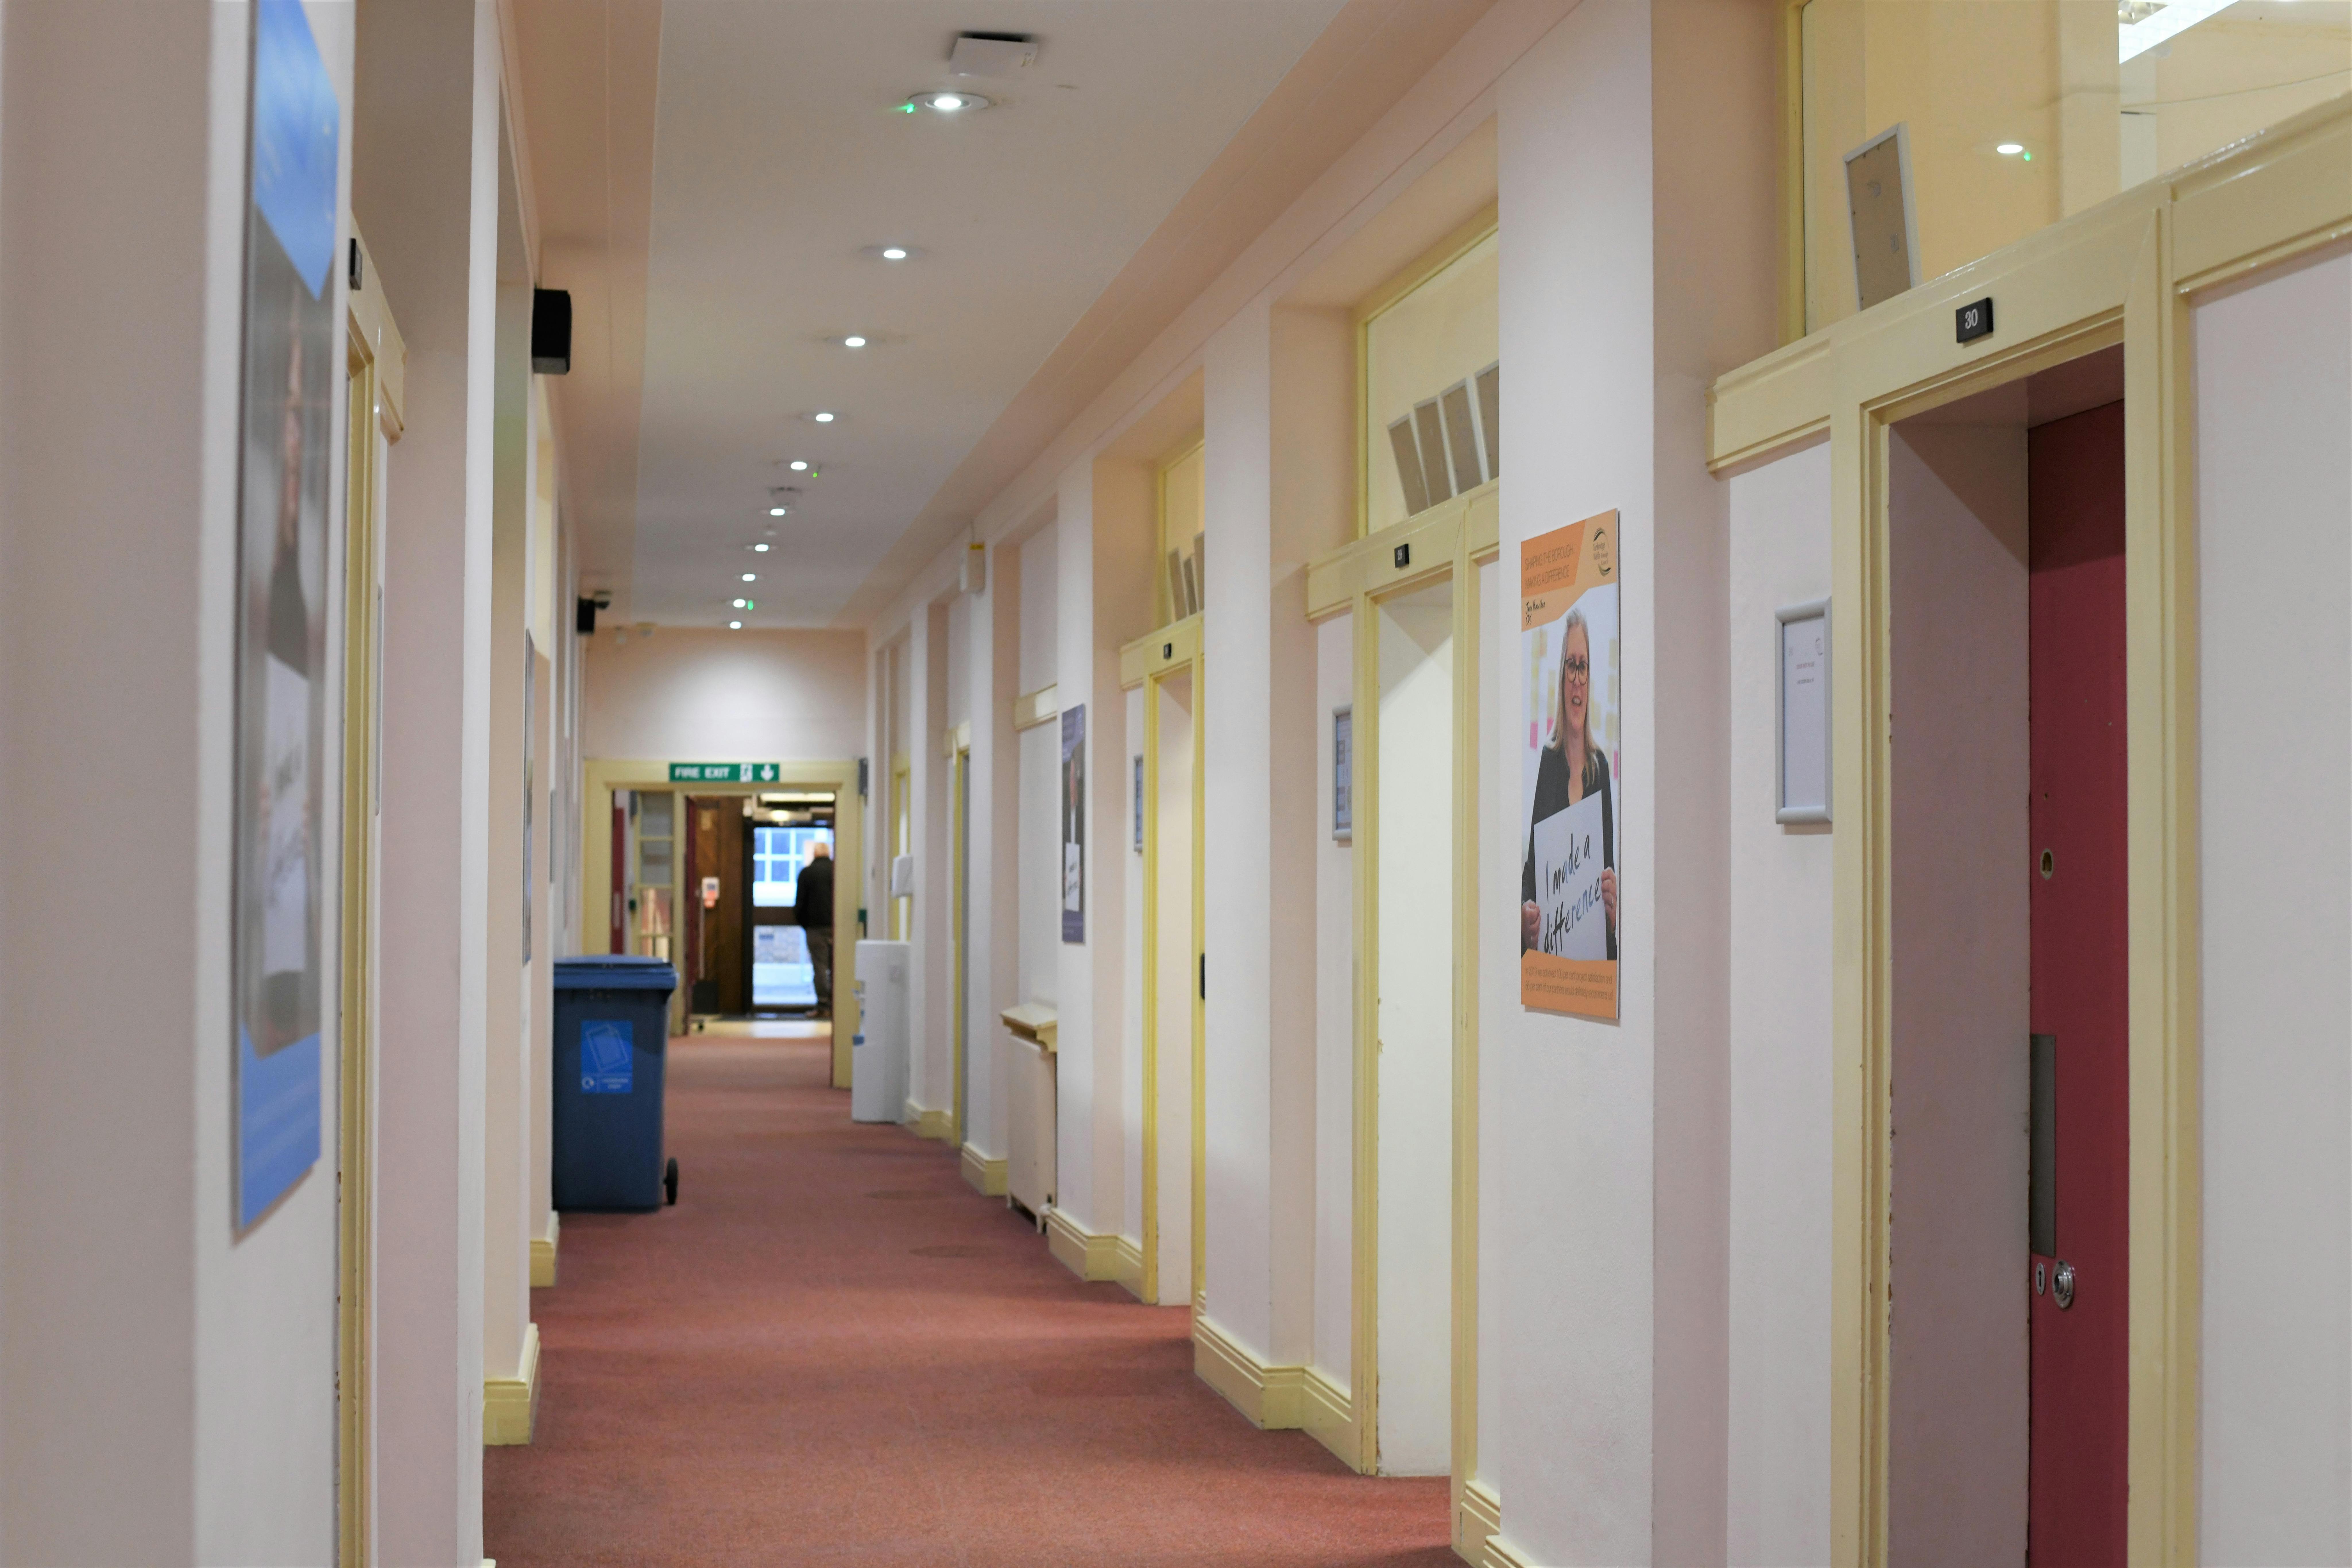 A corridor in the Town Hall